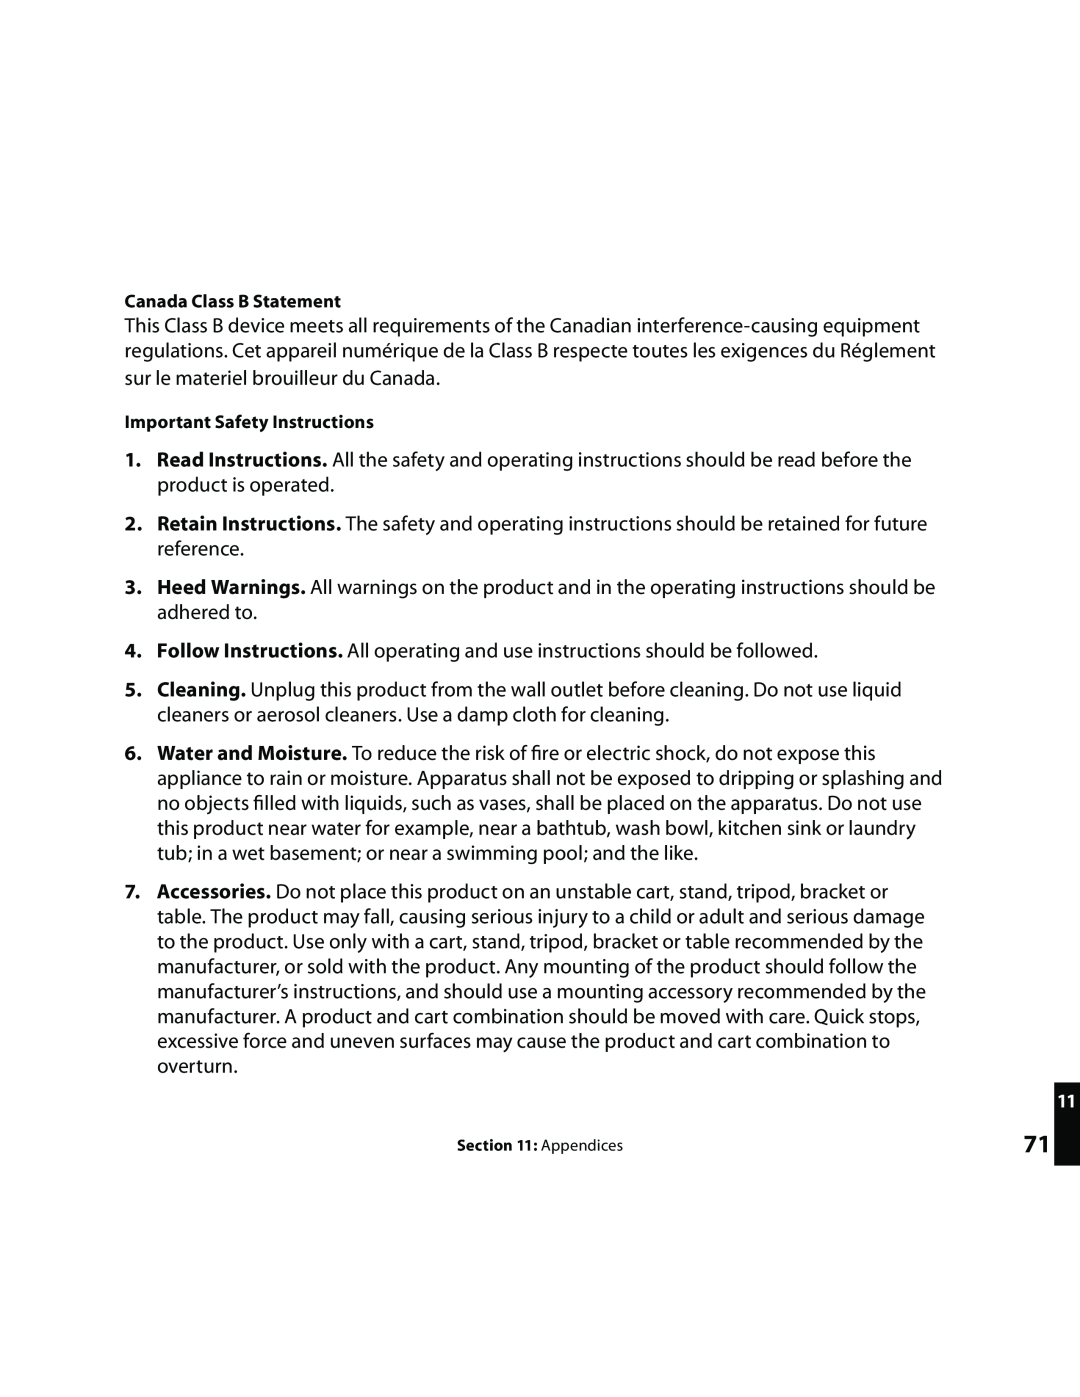 Roku Music Player manual Canada Class B Statement, Important Safety Instructions 